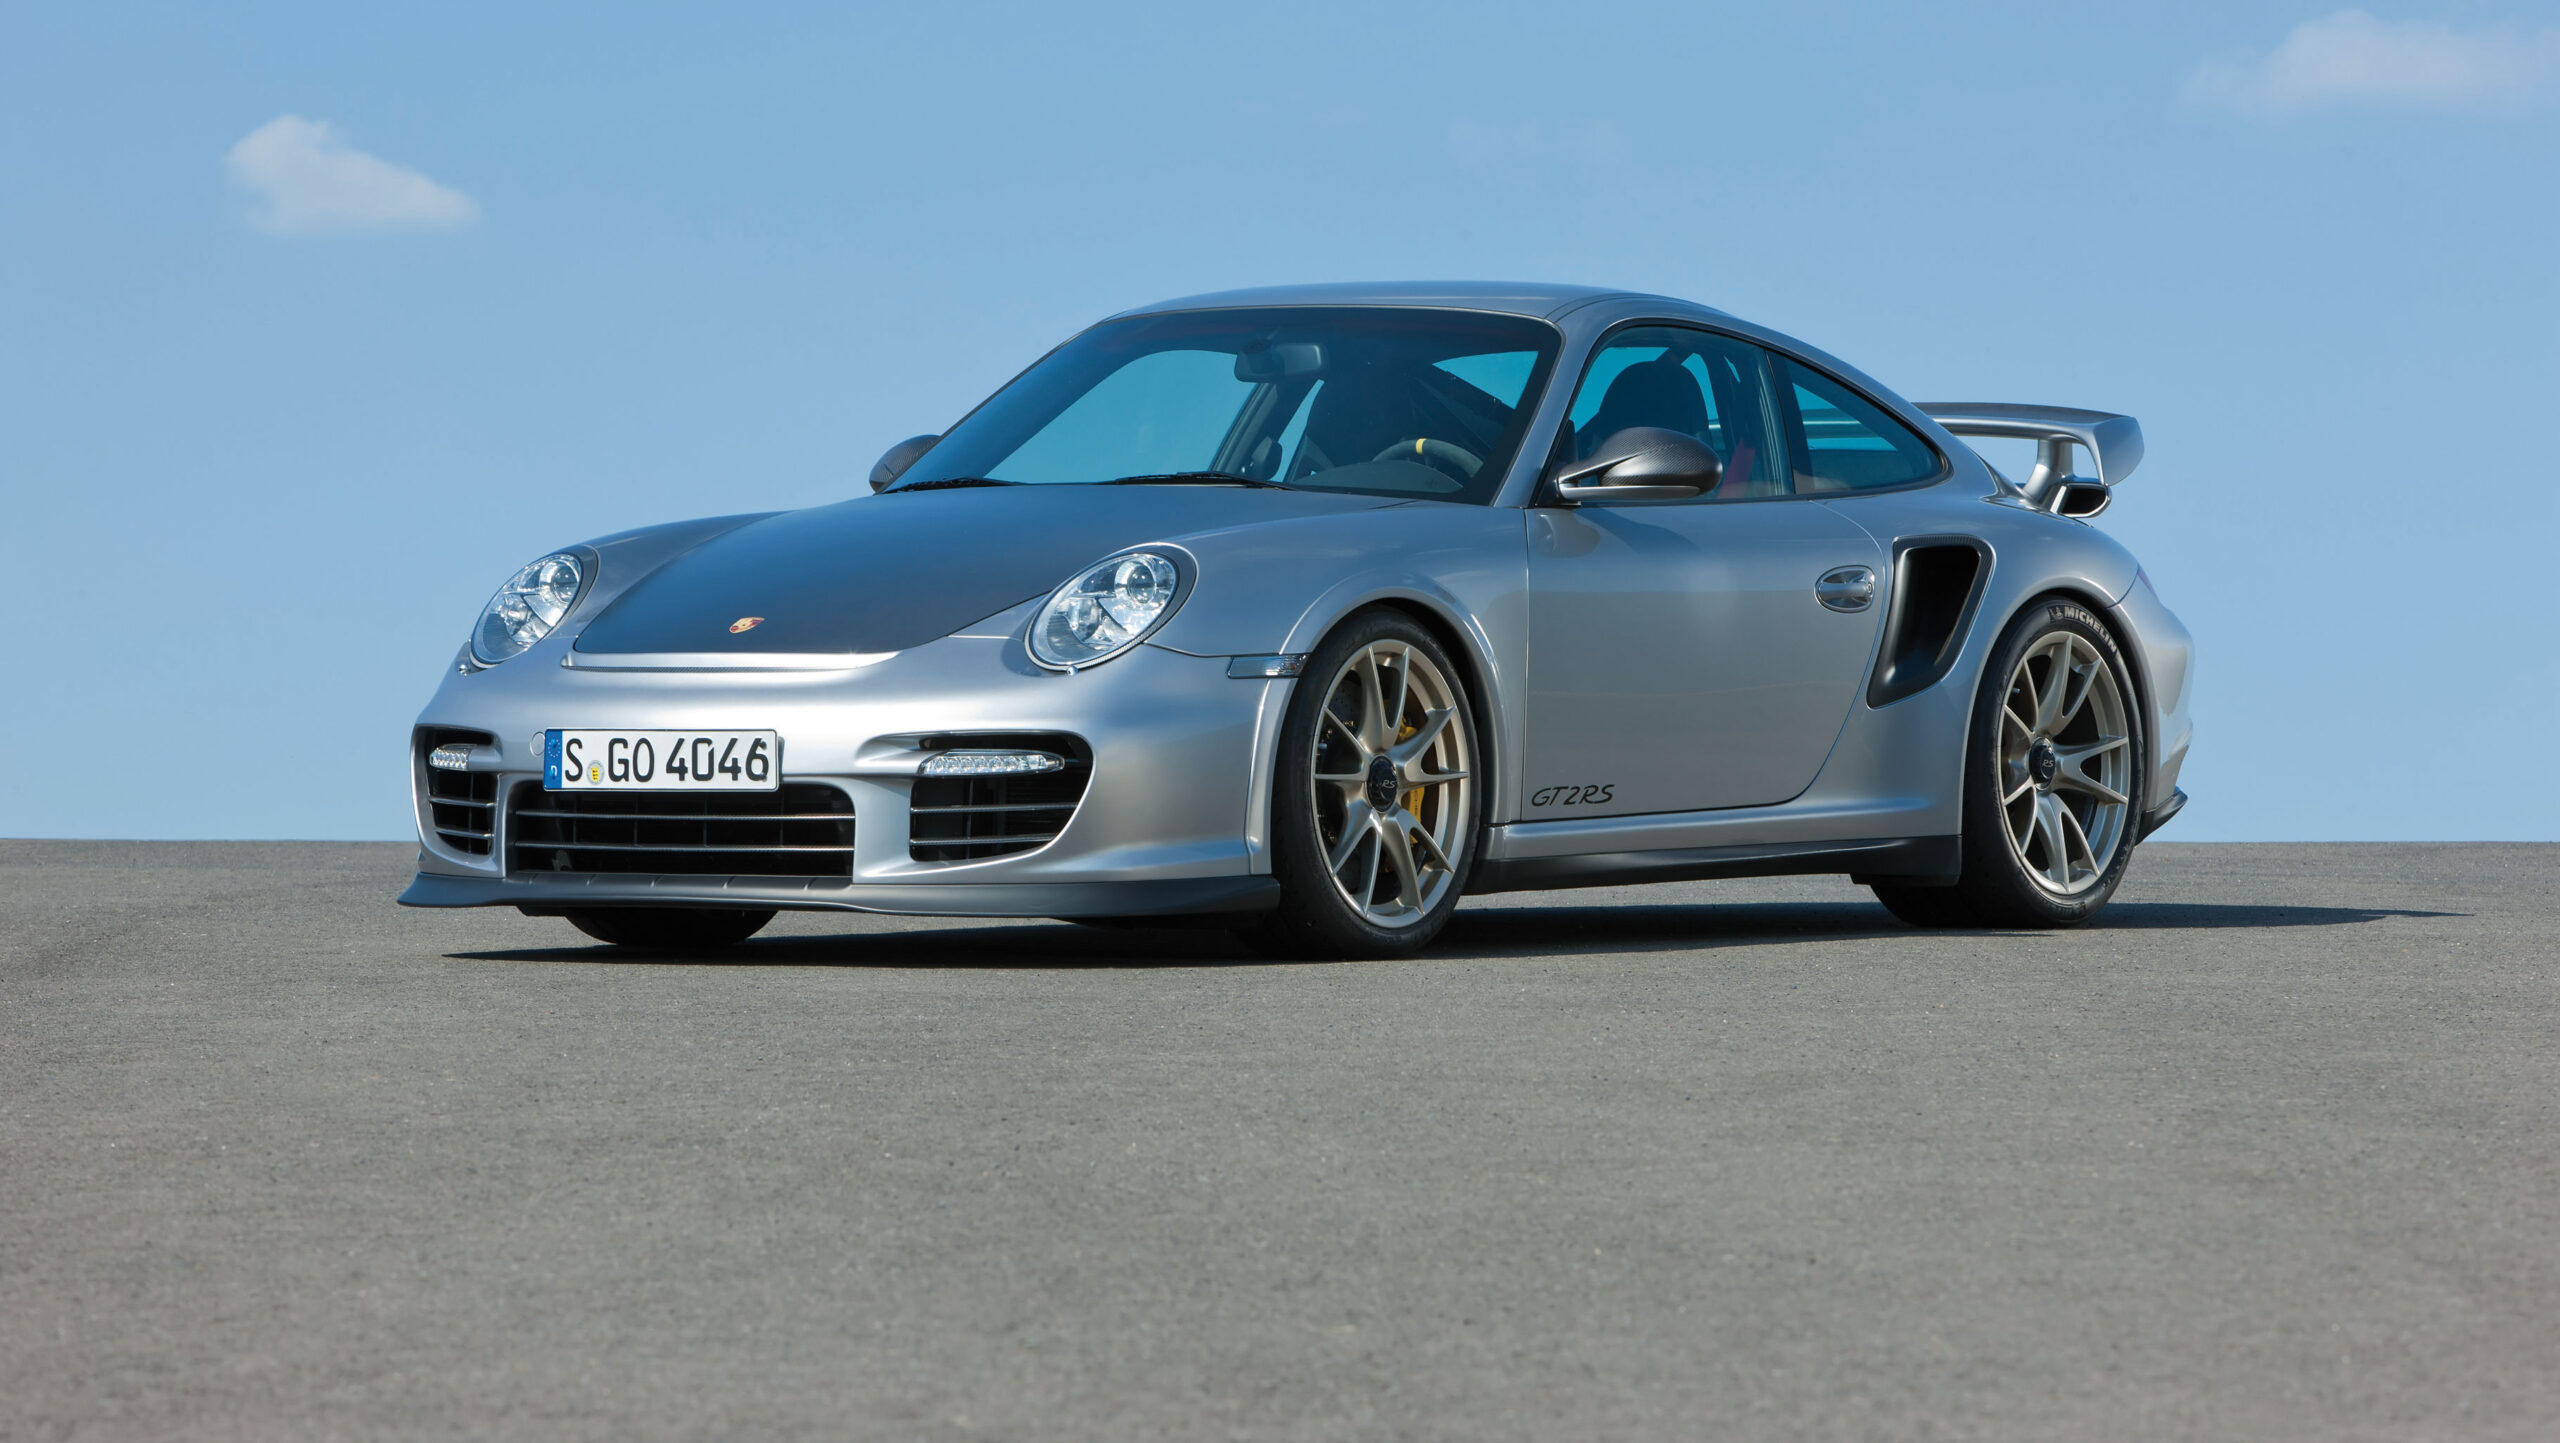 The 997 New Design and Great Variety